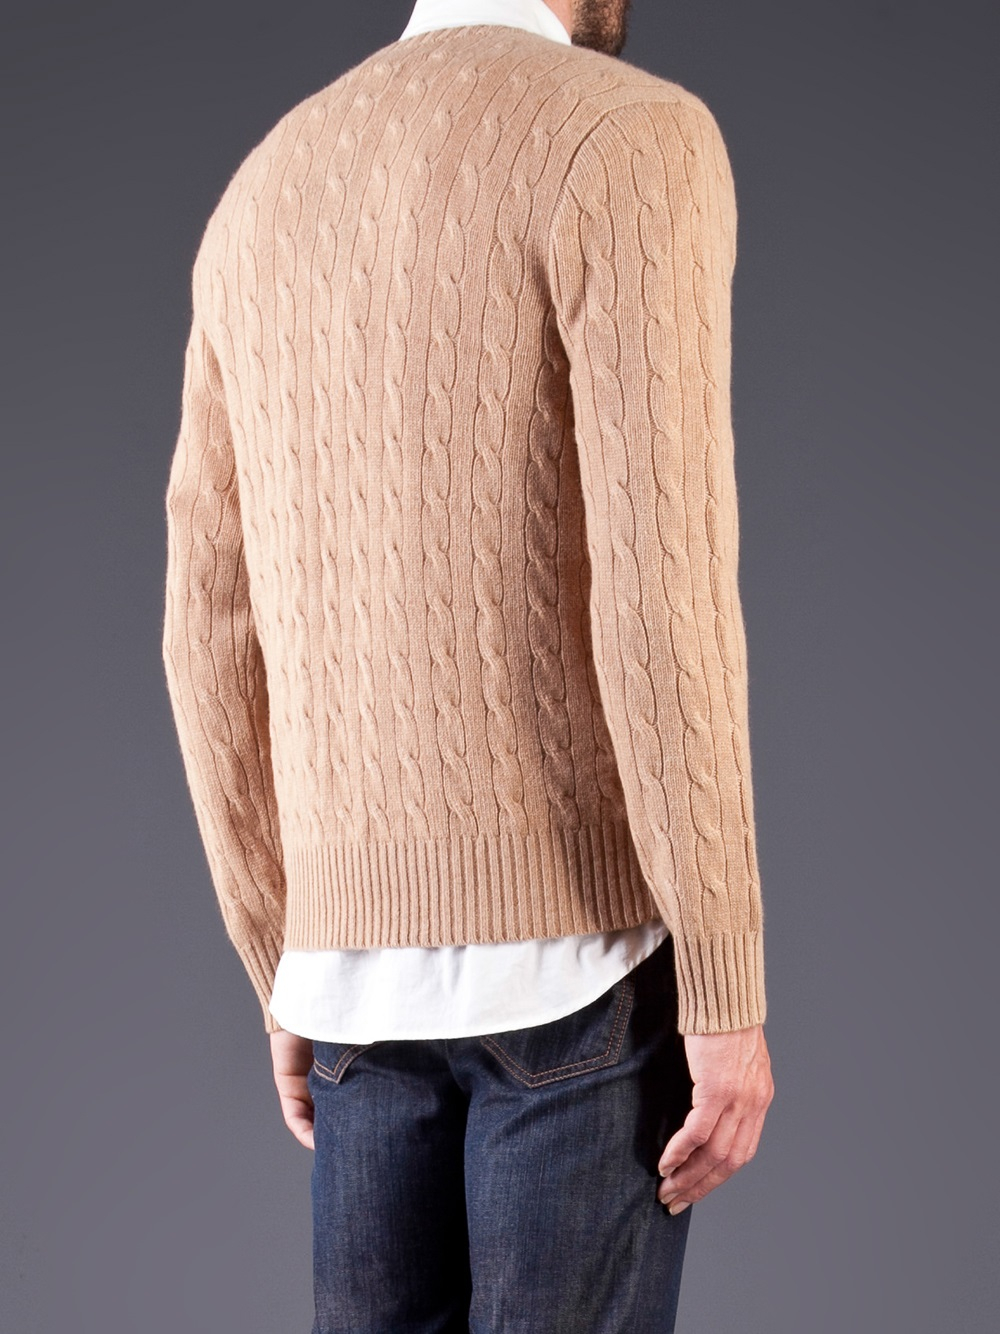 Lyst - Polo Ralph Lauren Cashmere Cable Knit Sweater in Natural for Men